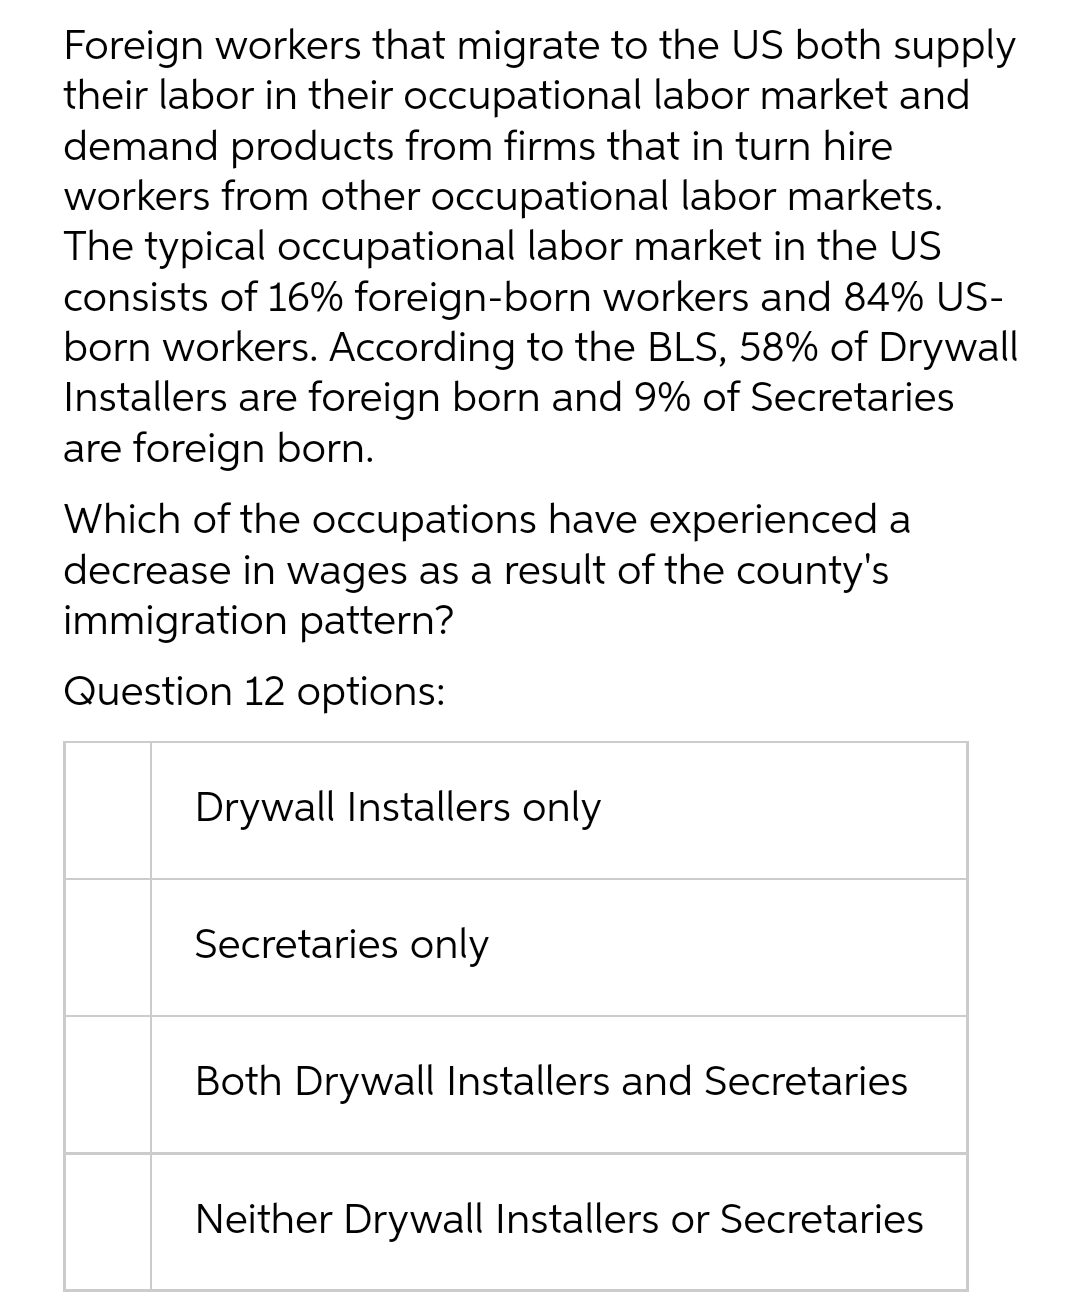 Foreign workers that migrate to the US both supply
their labor in their occupational labor market and
demand products from firms that in turn hire
workers from other occupational labor markets.
The typical occupational labor market in the US
consists of 16% foreign-born workers and 84% US-
born workers. According to the BLS, 58% of Drywall
Installers are foreign born and 9% of Secretaries
are foreign born.
Which of the occupations have experienced a
decrease in wages as a result of the county's
immigration pattern?
Question 12 options:
Drywall Installers only
Secretaries only
Both Drywall Installers and Secretaries
Neither Drywall Installers or Secretaries
